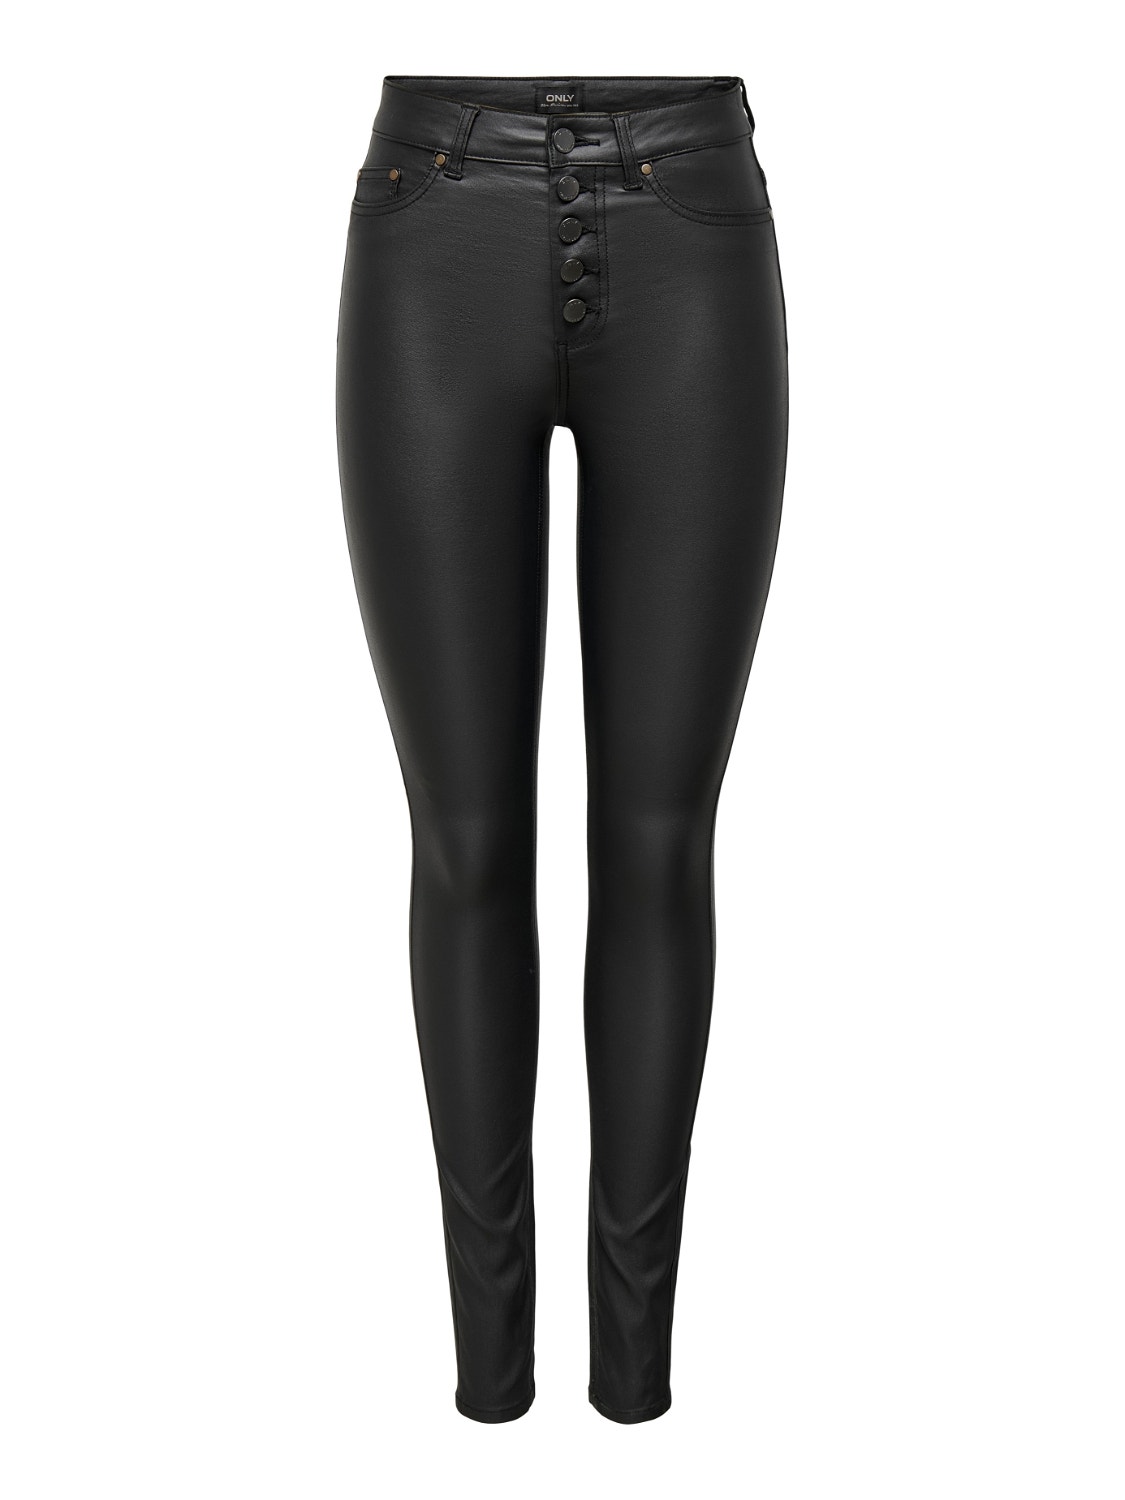 ONLY Skinny Fit High waist Trousers -Black - 15250254